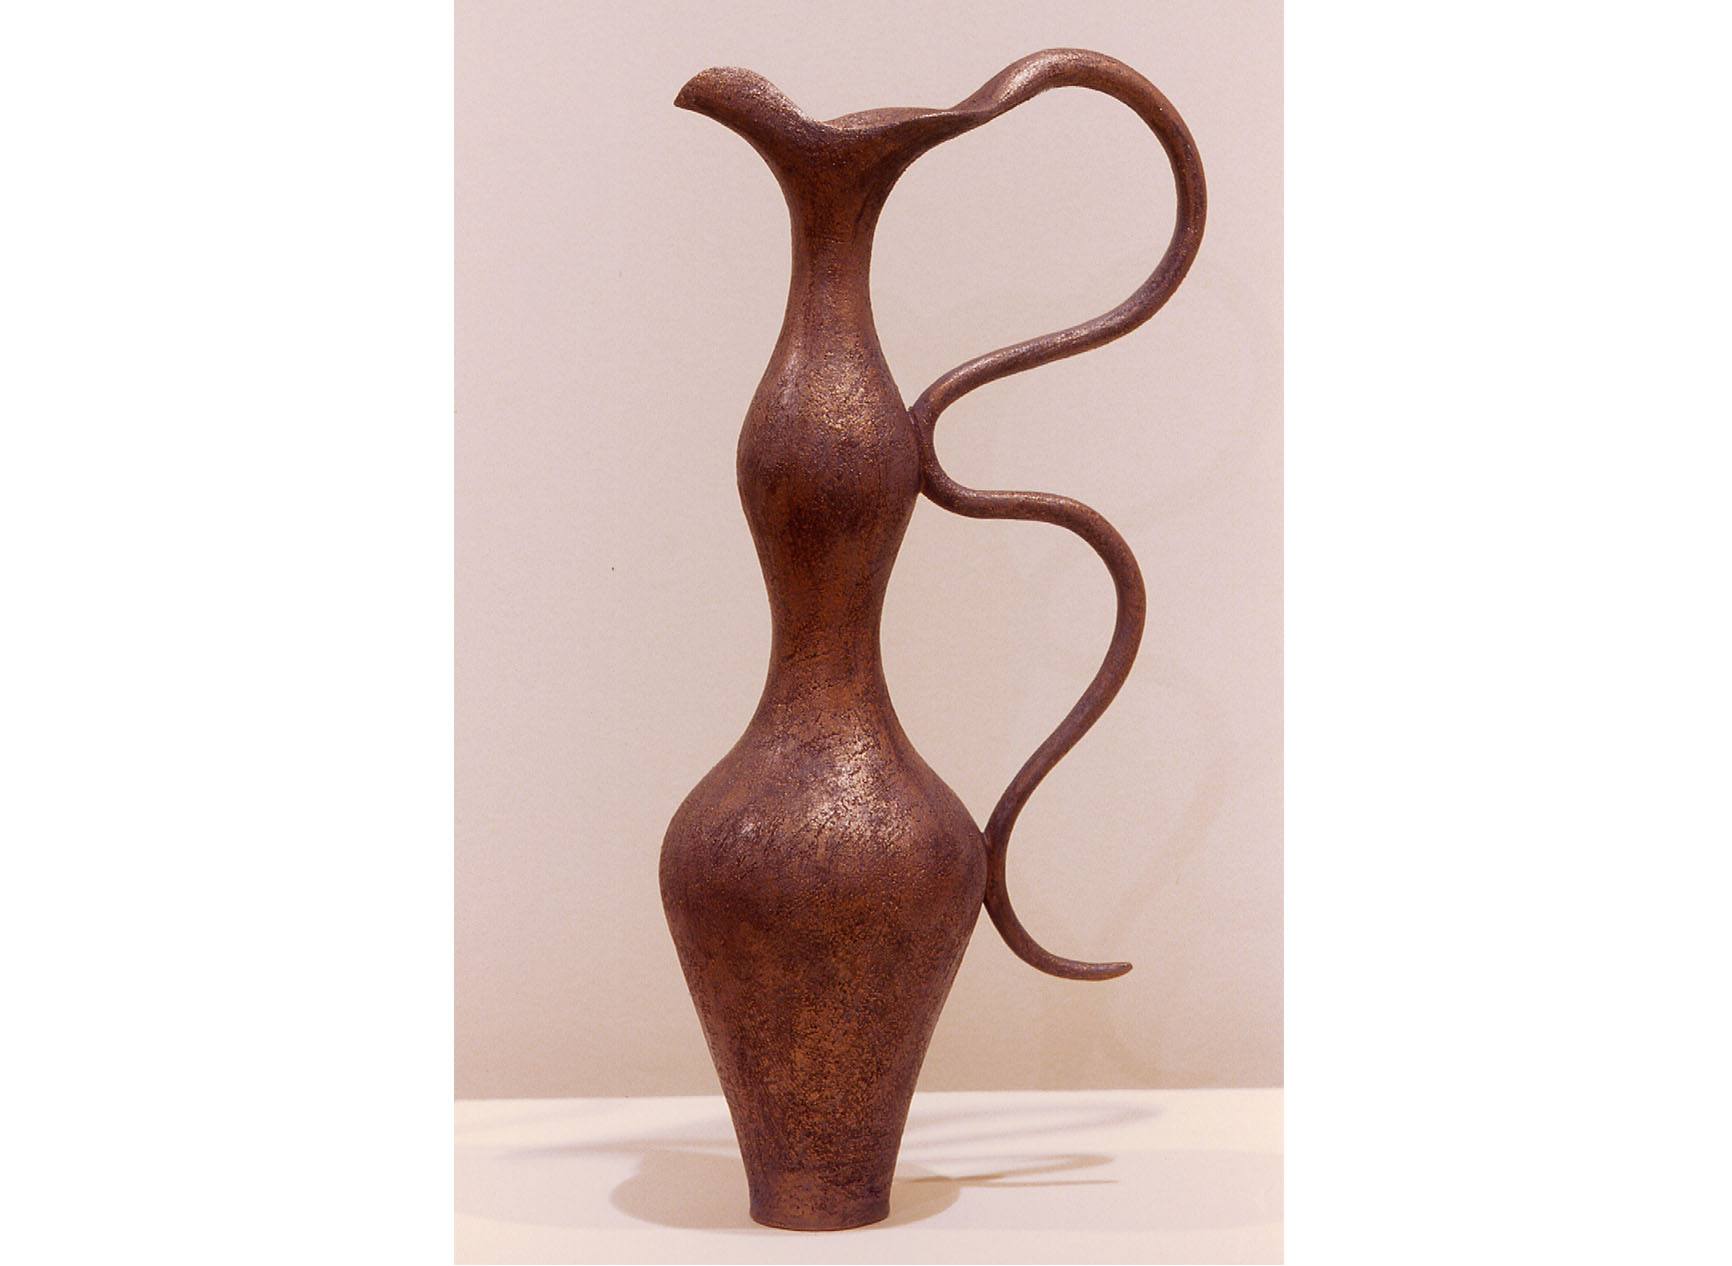 Curvacious vase with curvacious handle called Dancing the Shadow